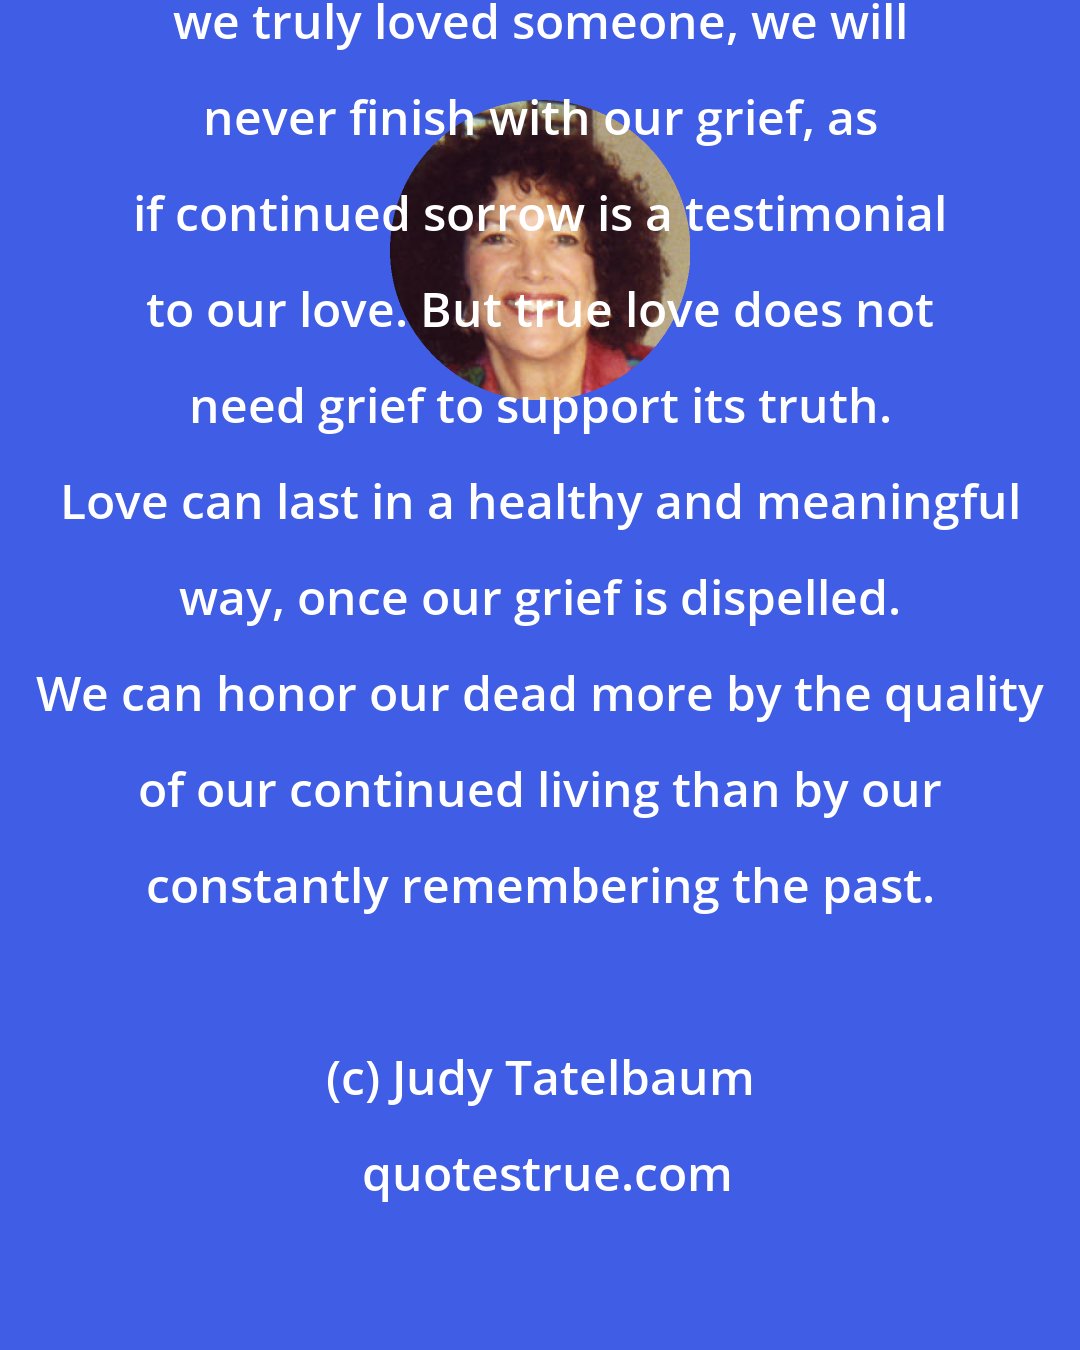 Judy Tatelbaum: Another misconception is that if we truly loved someone, we will never finish with our grief, as if continued sorrow is a testimonial to our love. But true love does not need grief to support its truth. Love can last in a healthy and meaningful way, once our grief is dispelled. We can honor our dead more by the quality of our continued living than by our constantly remembering the past.